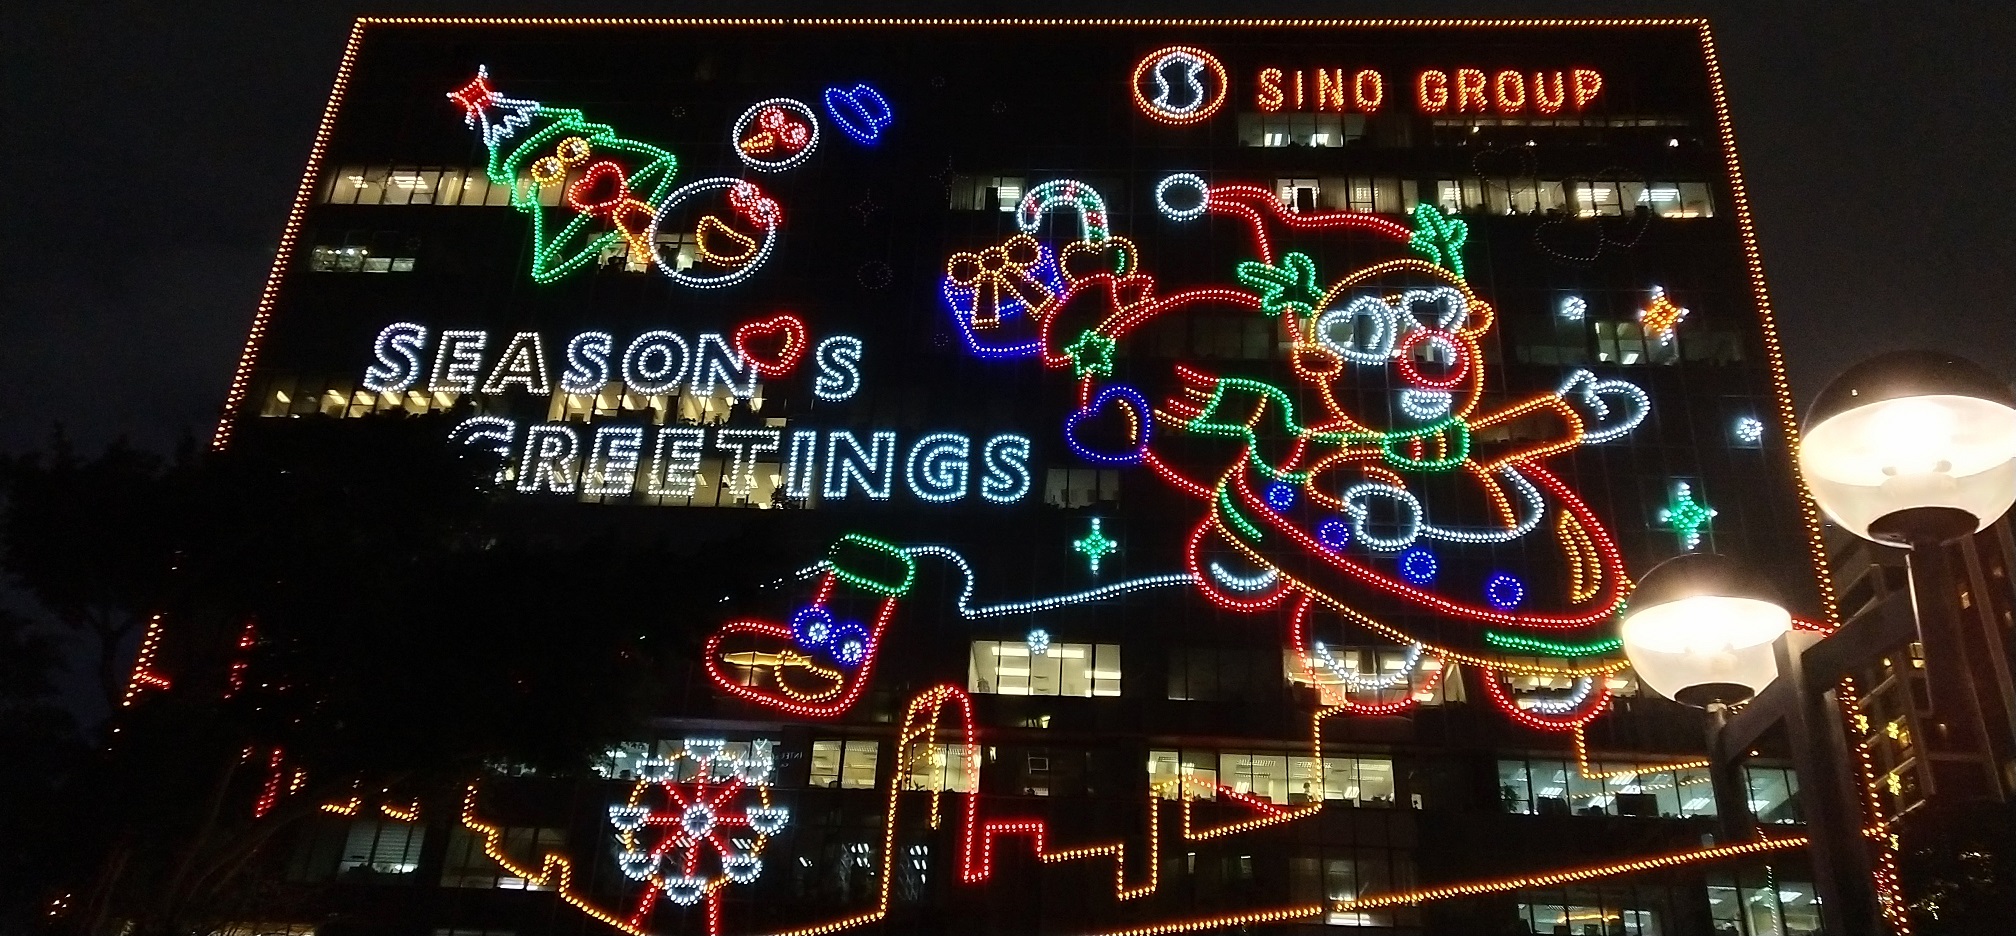 Share Frank's post about the Christmas decorations at East Tsim Sha Tsui